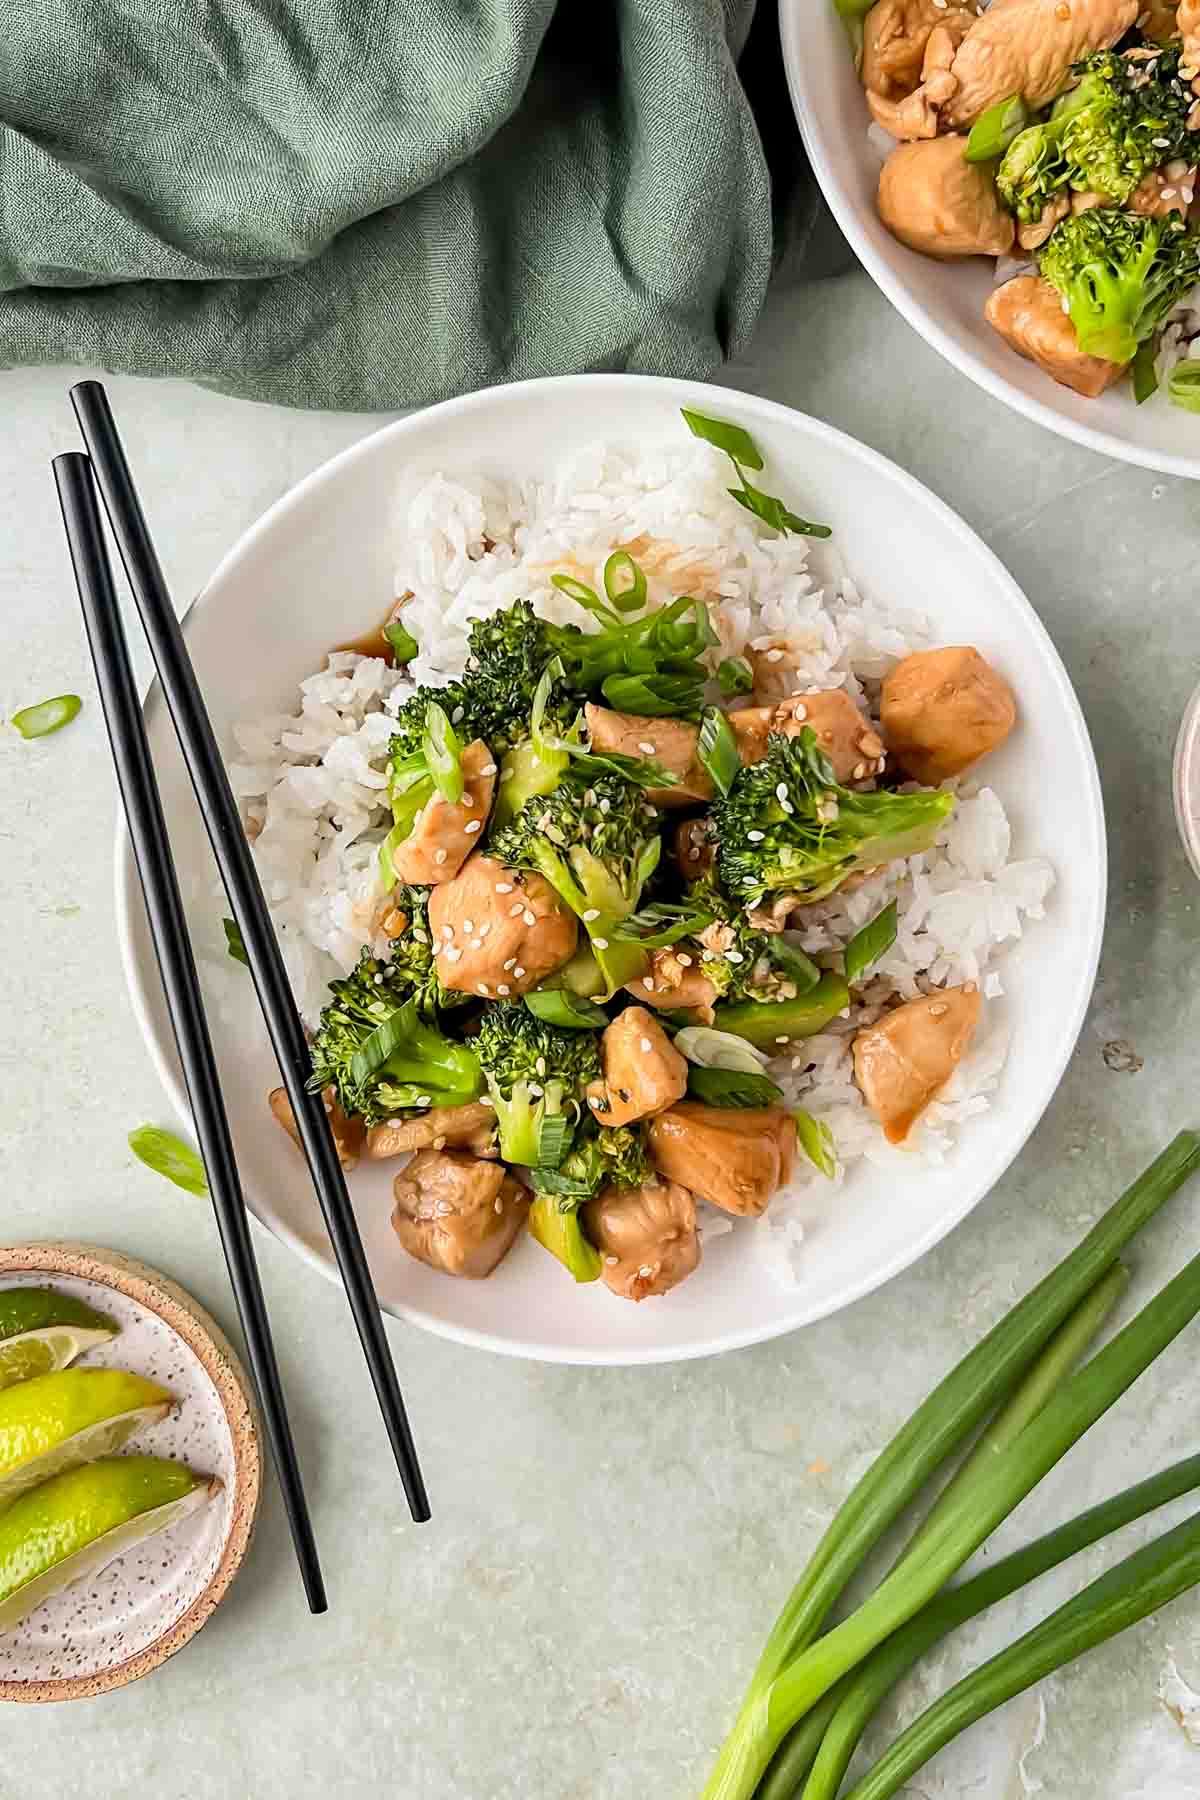 teriyaki chicken and broccoli served over white rice in white bowl with chop sticks.